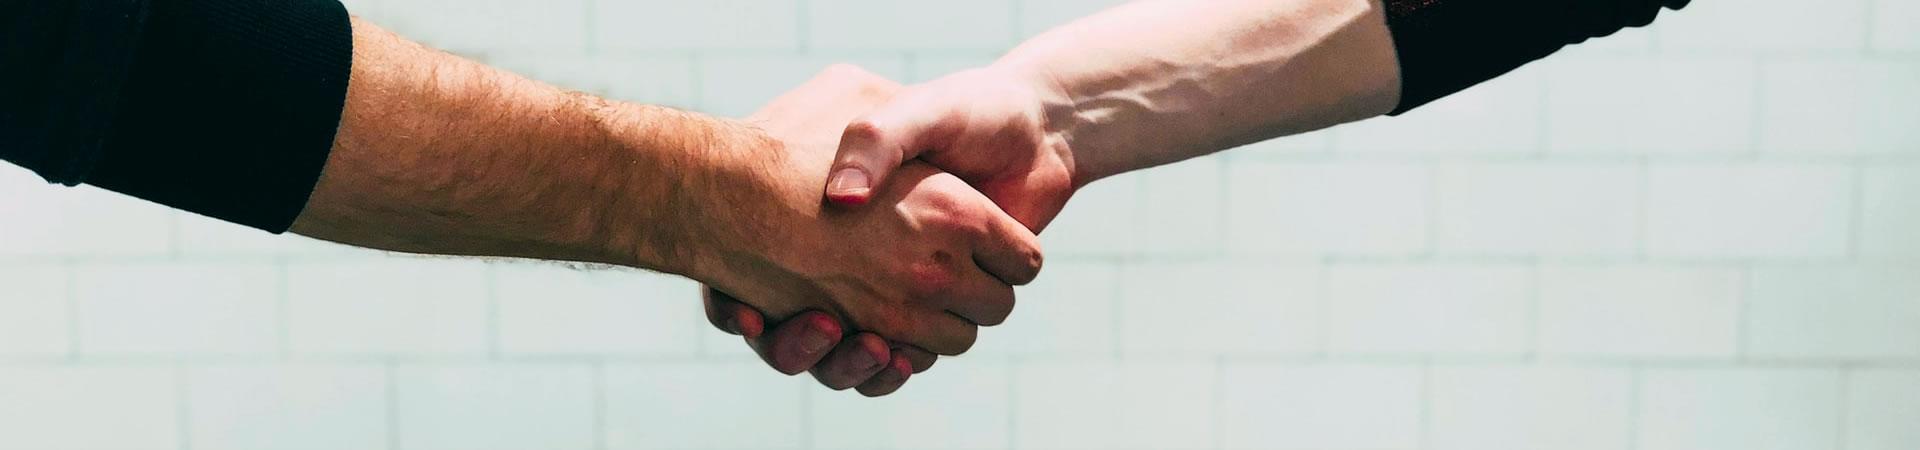 Employer and new employee shaking hands